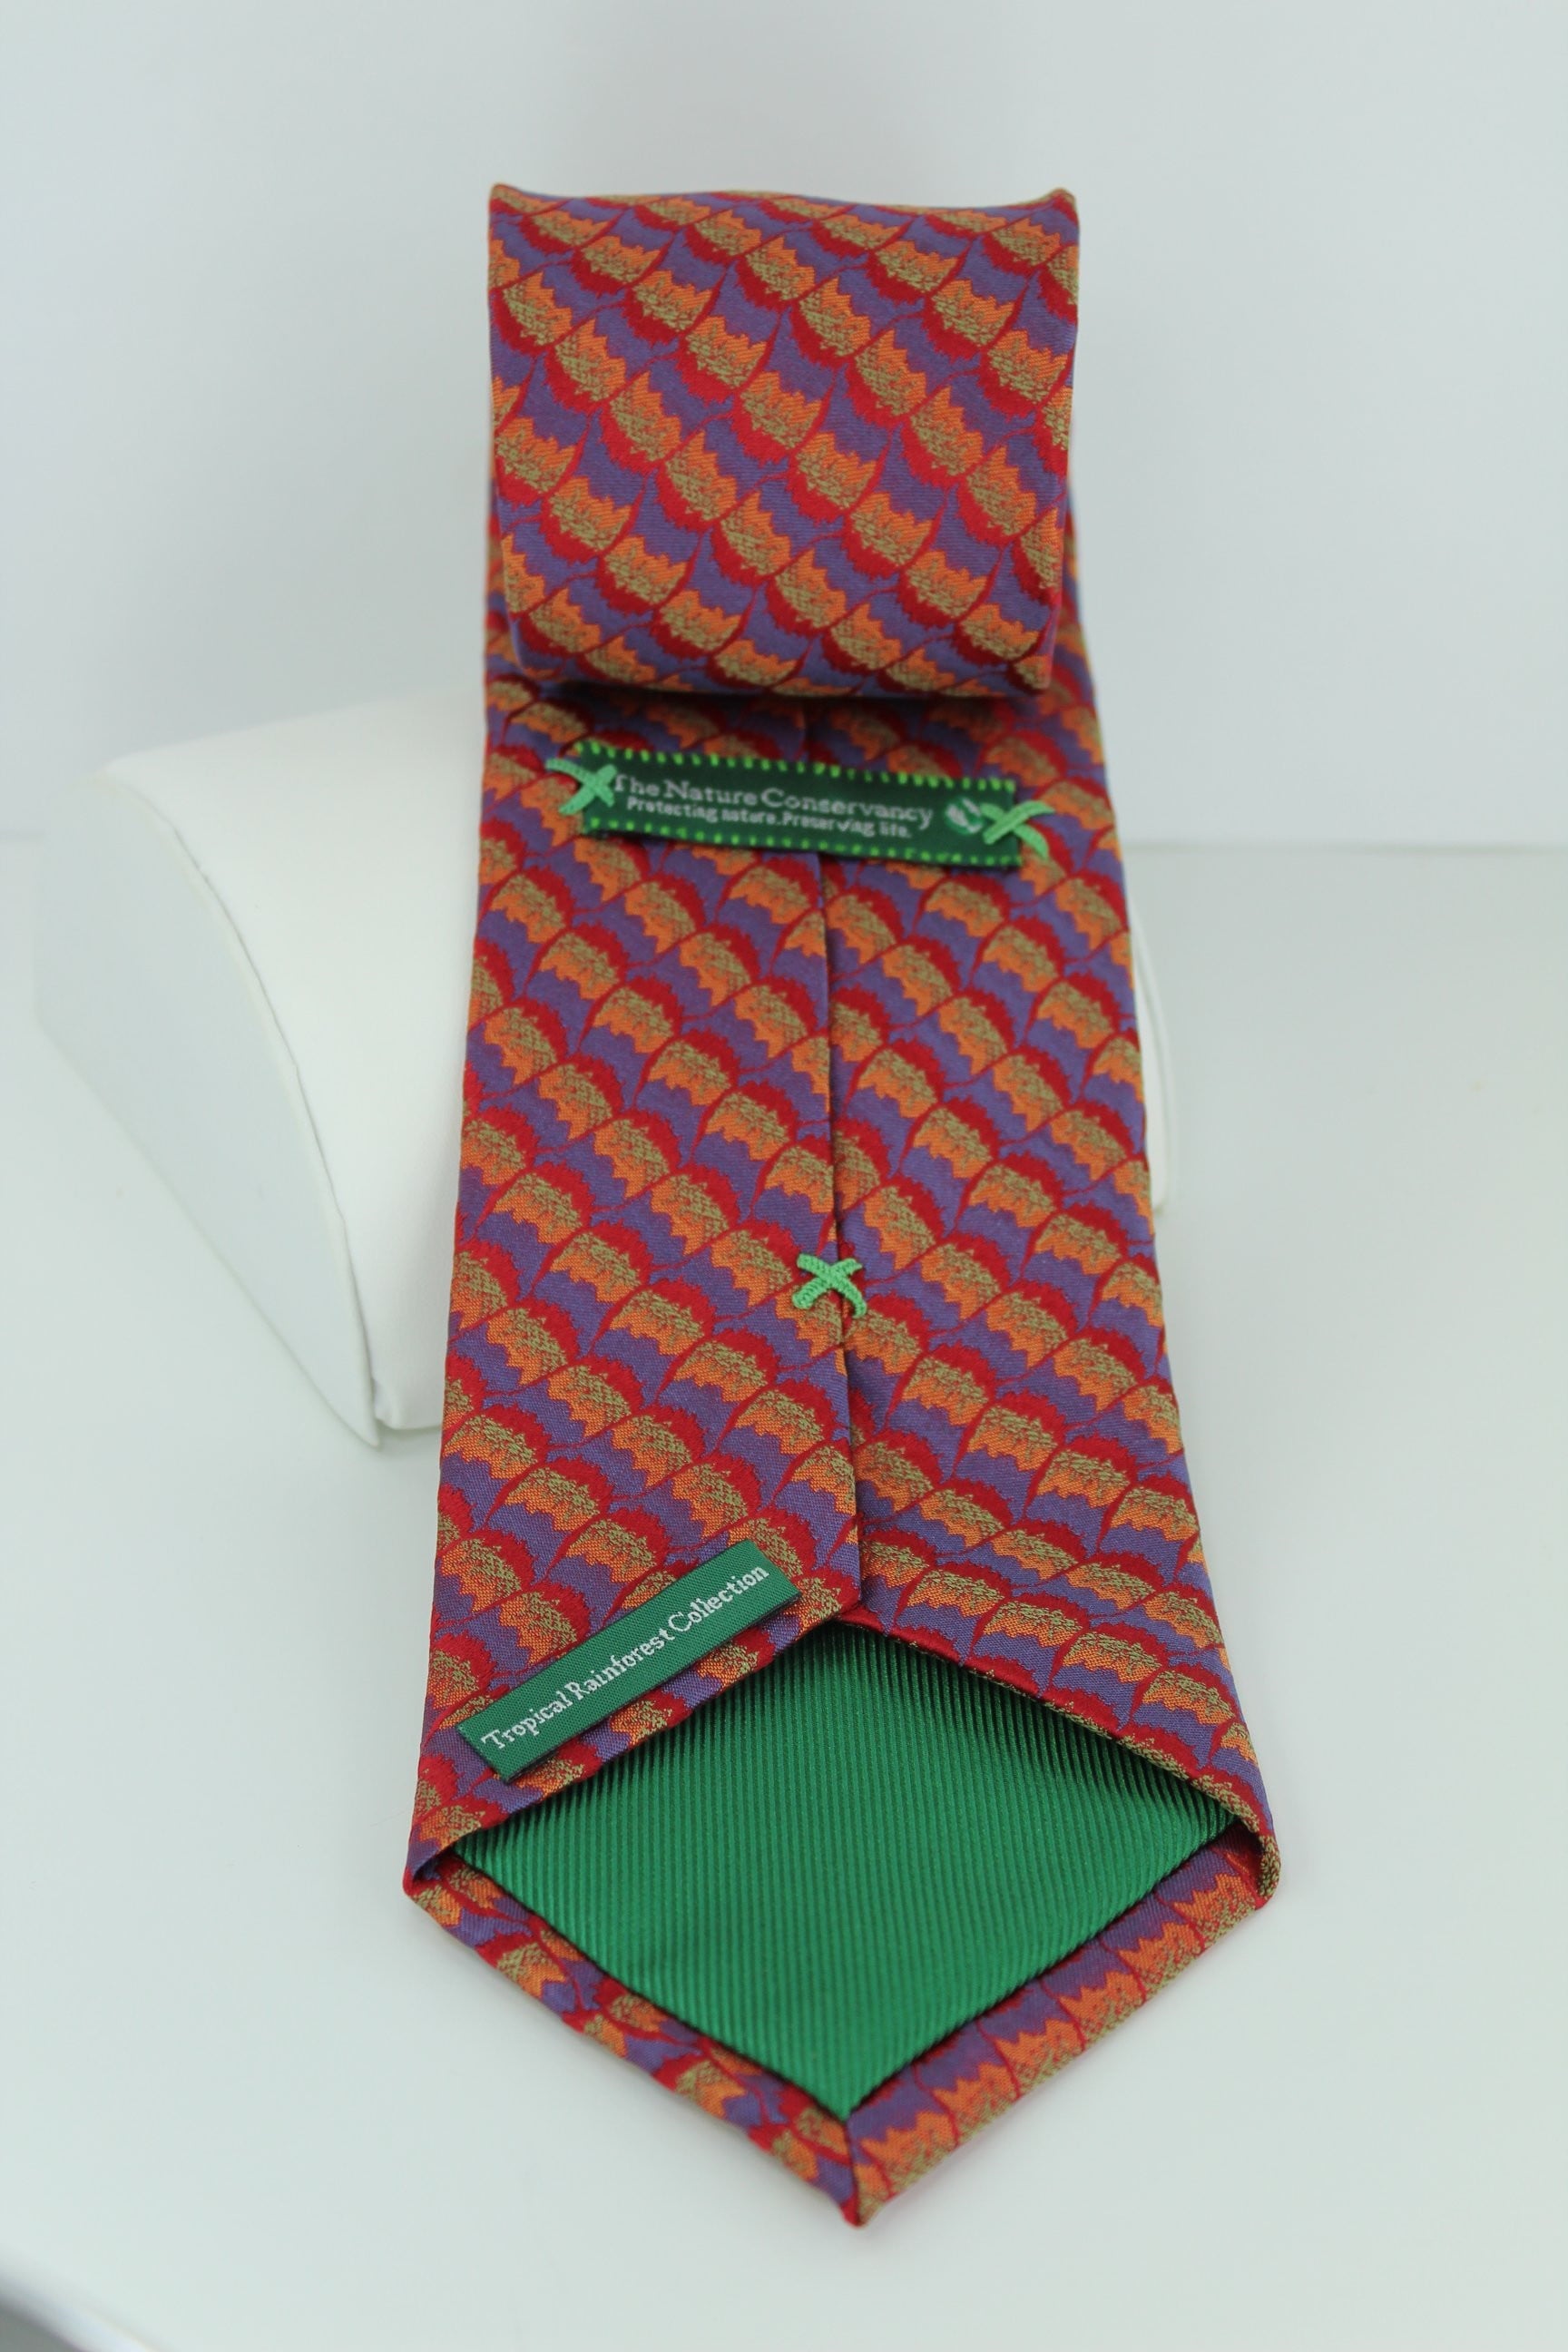 Nature Conservancy Tie - Tropical Rainforest Collection  - Silk Hand Made beautiful quality